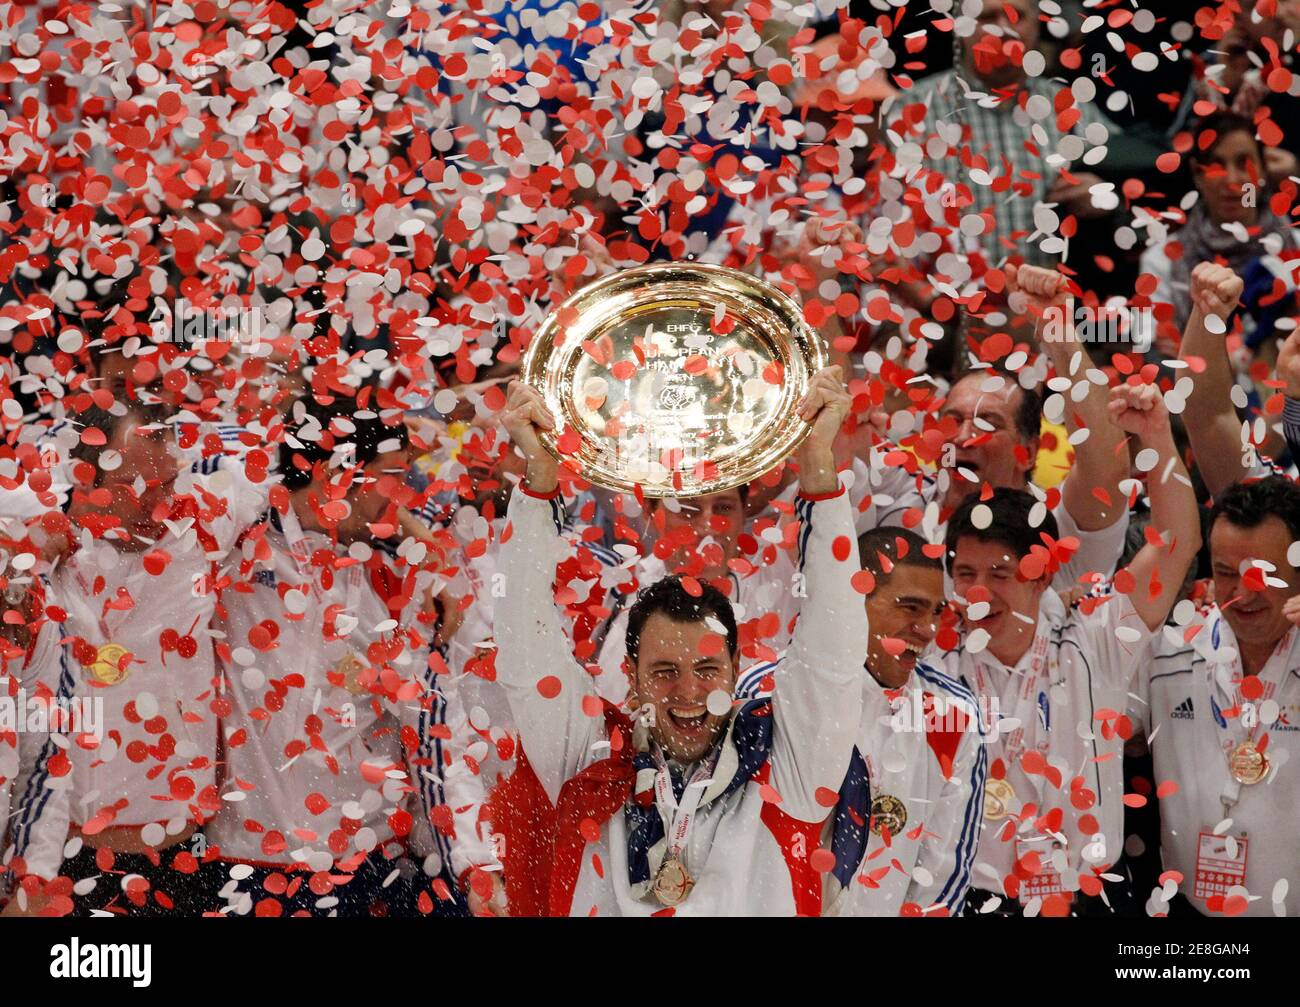 France's team pose with the gold medal after winning the Men's European Handball Federation Championship final match against Croatia in Vienna, January 31, 2010.           REUTERS/Oleg Popov   (AUSTRIA - Tags: SPORT HANDBALL) Stock Photo